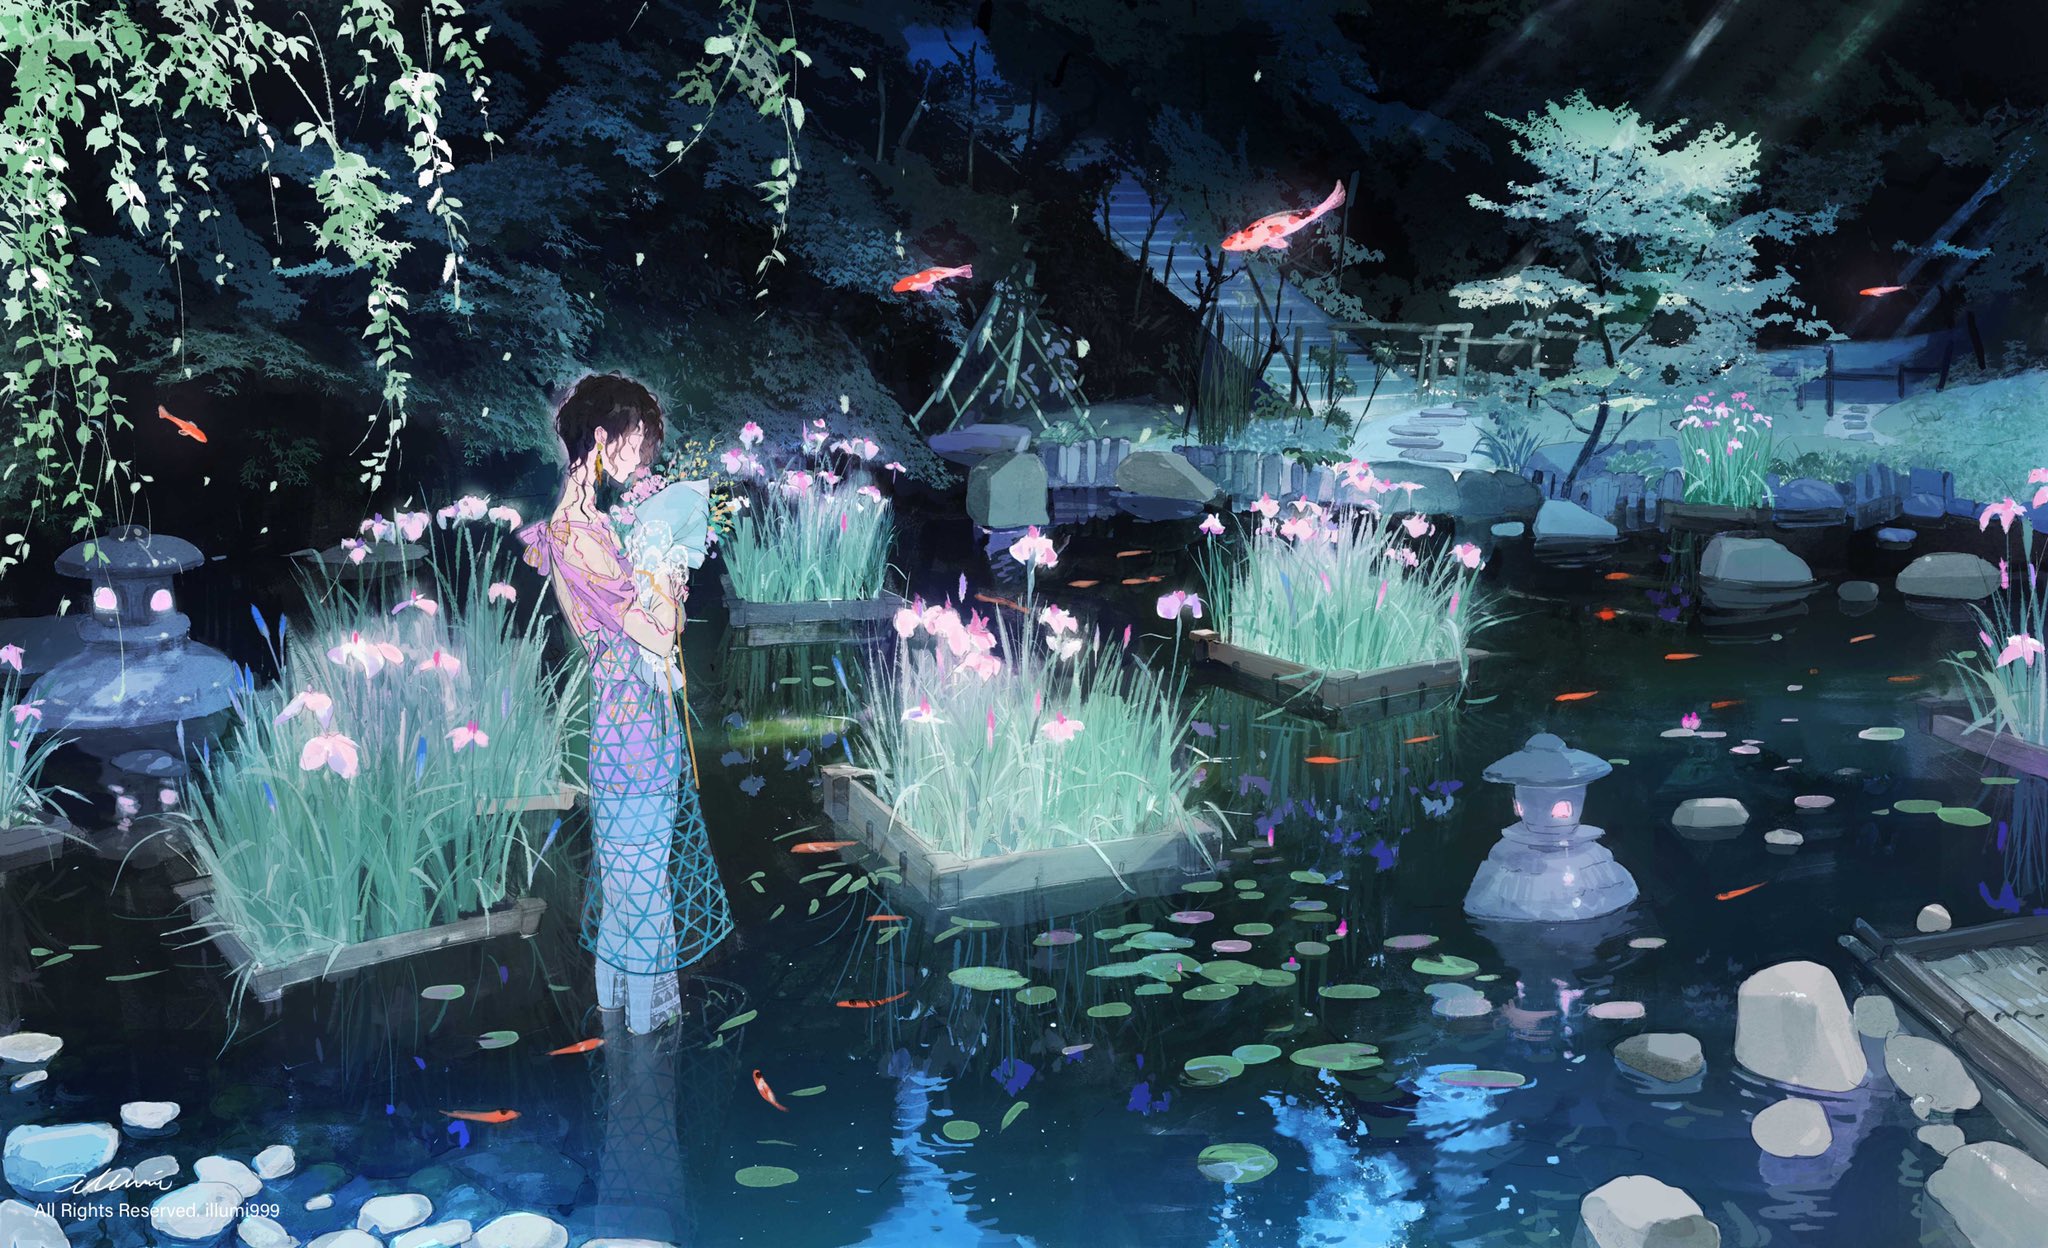 Anime 2048x1248 anime girls reflection plants grass fish pond trees water black hair closed eyes standing in water leaves flowers stairs rocks nenuphar bouquets illumi999 sunlight